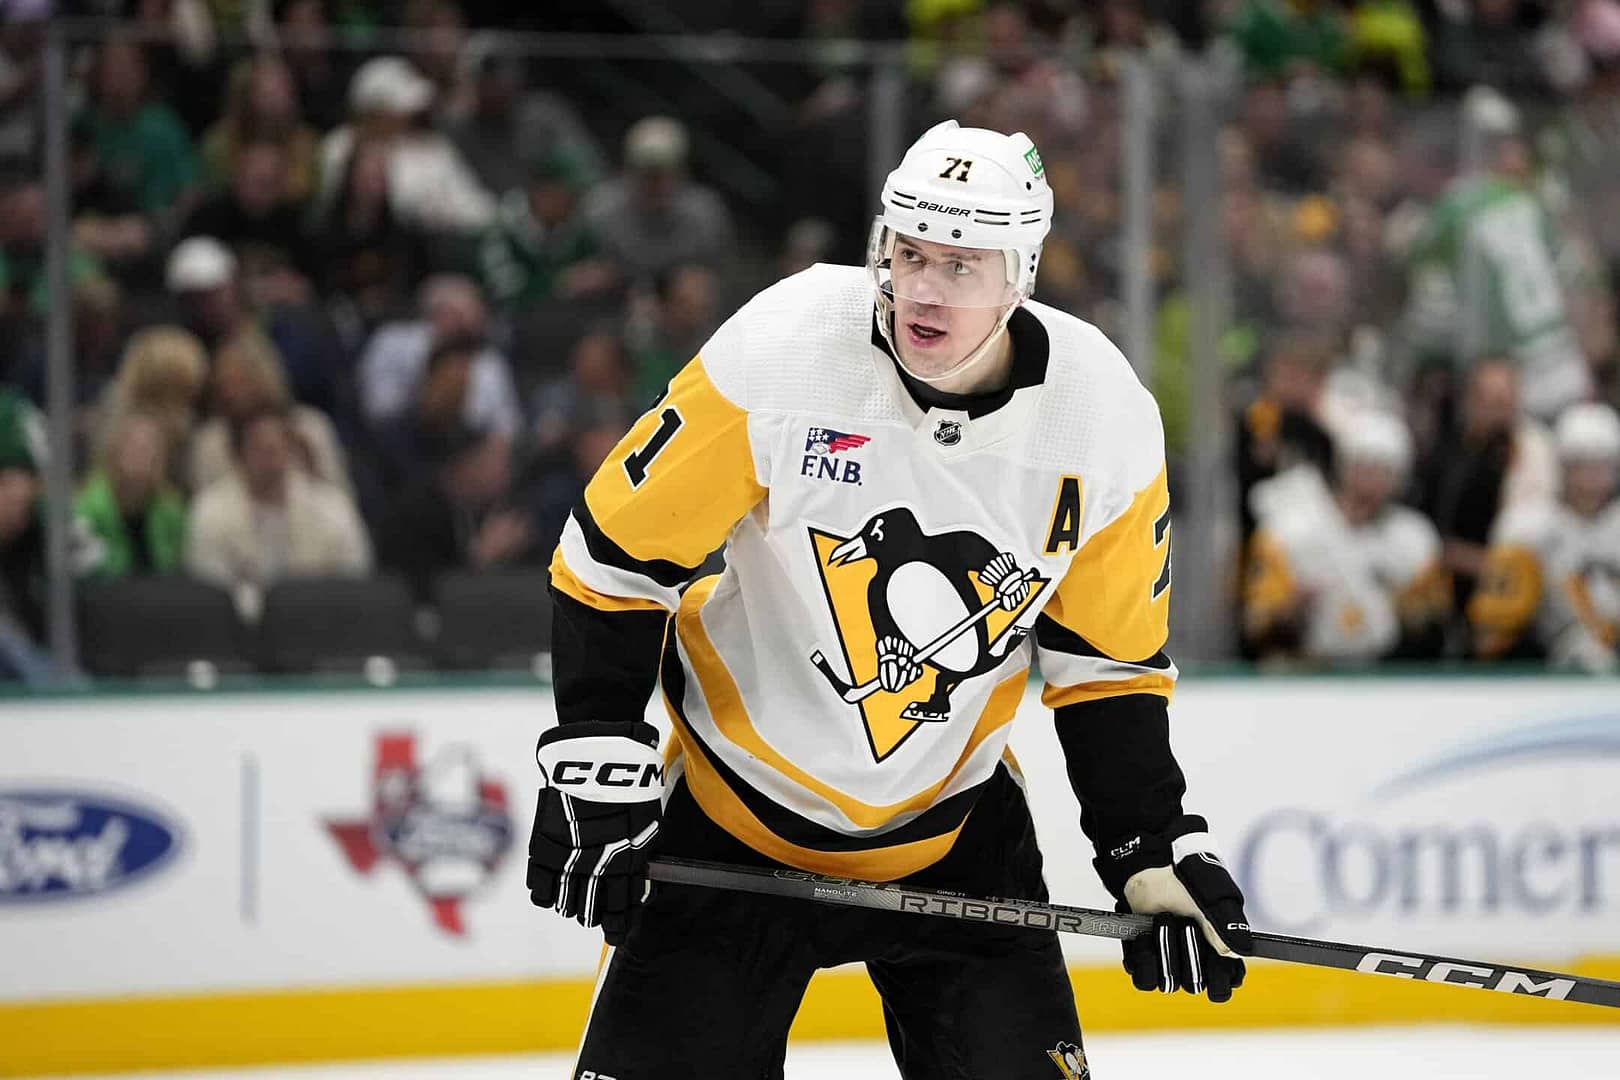 The best NHL player prop bets and anytime goalscorer picks for today, Monday, April 8, include Evgeni Malkin, who takes on the Maple Leafs...